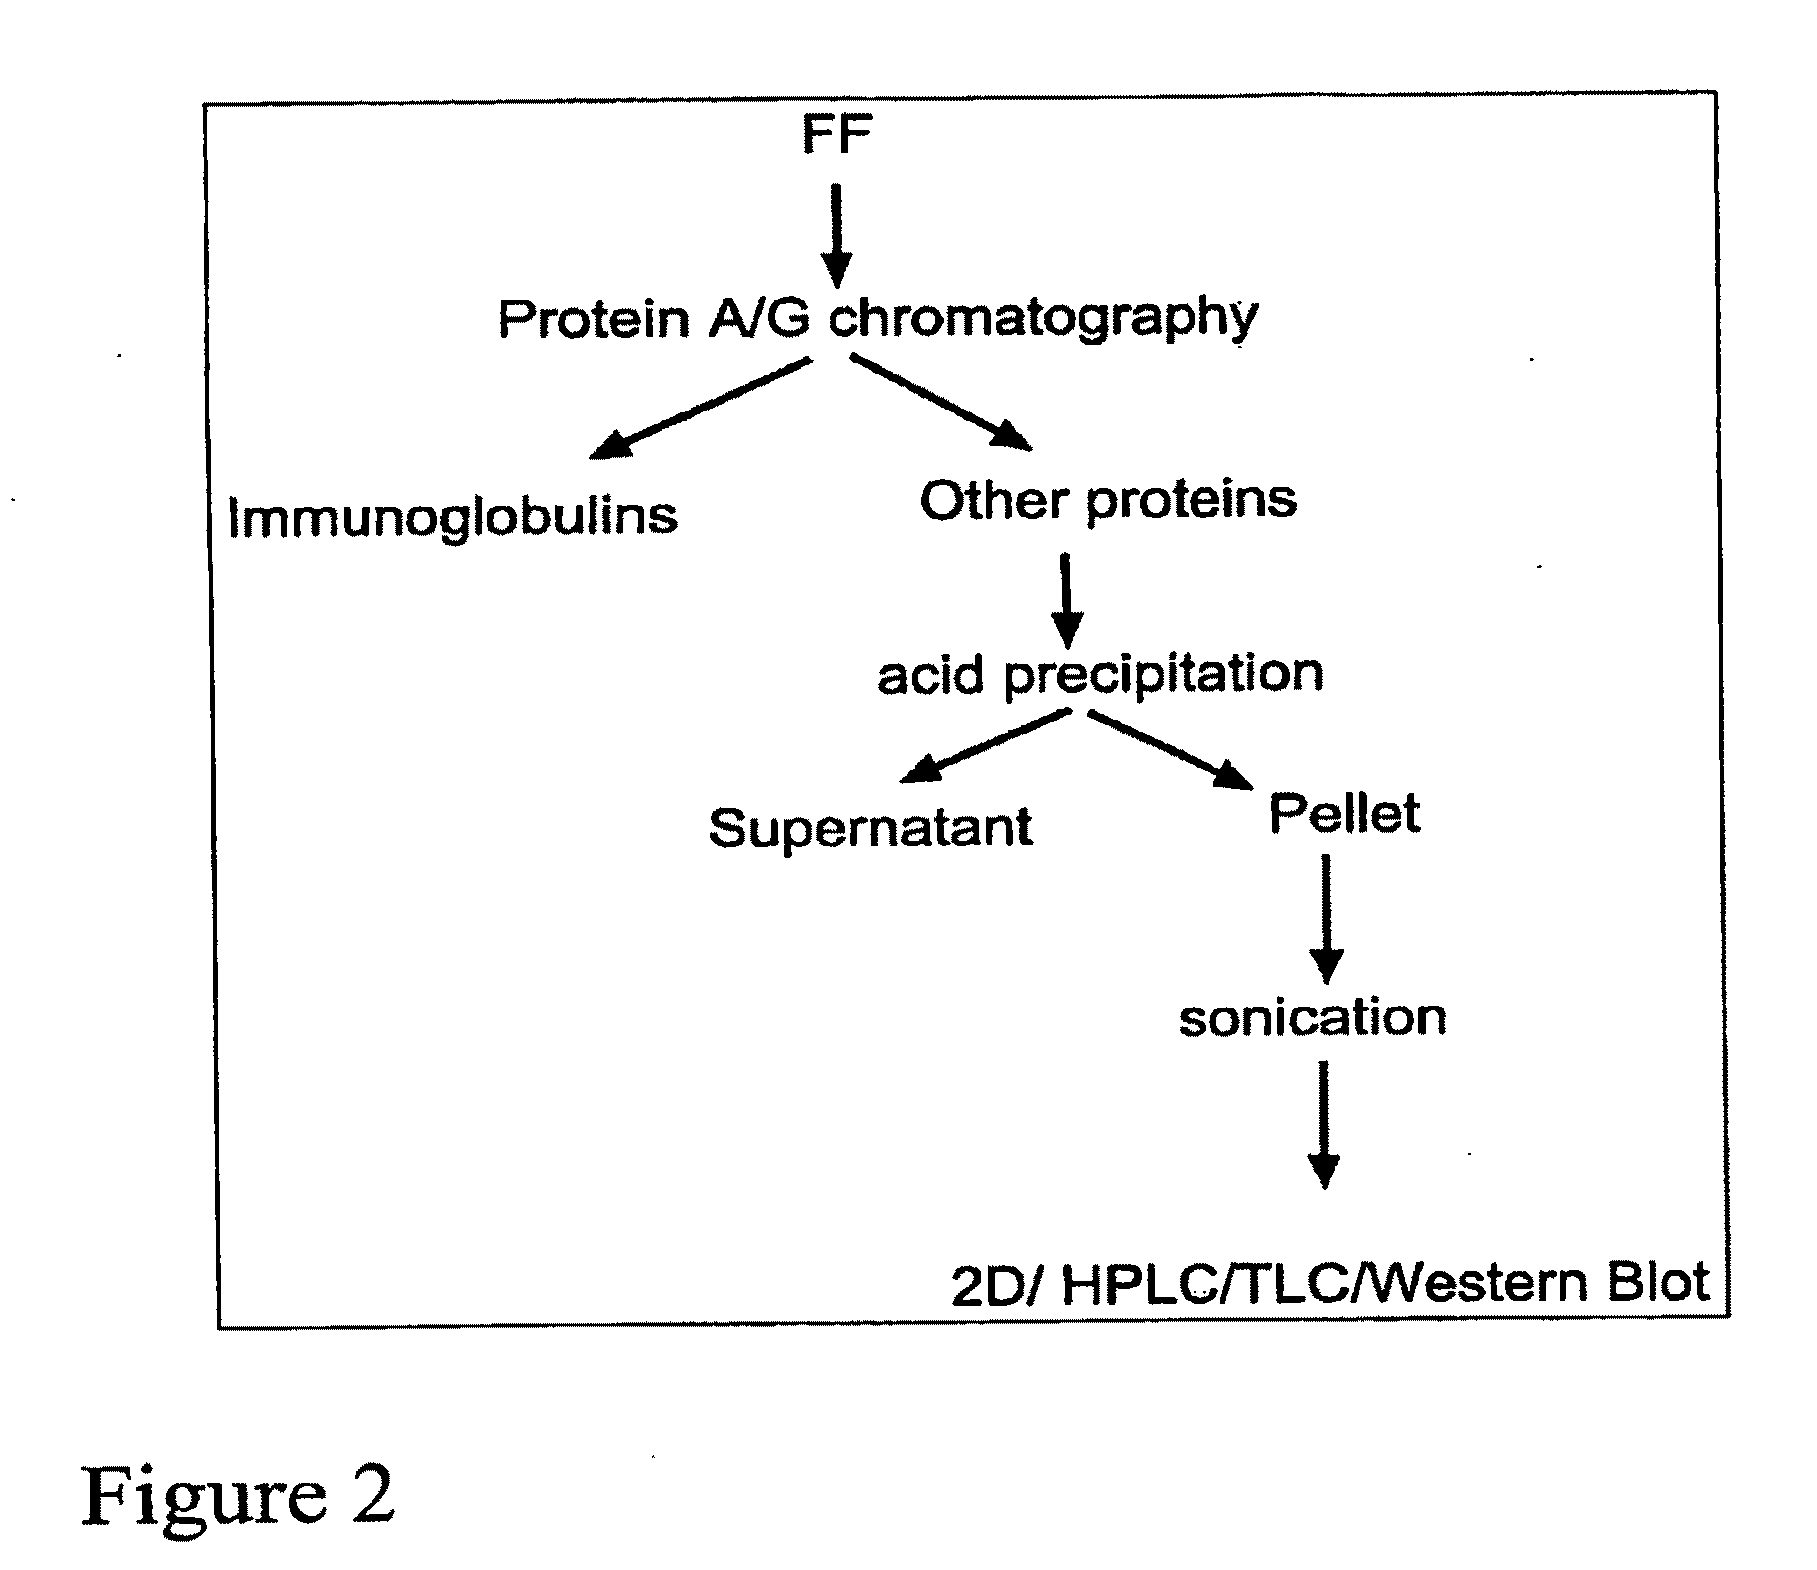 Methods for the Diagnosis and Treatment of Female Infertility Using Molecular Markers